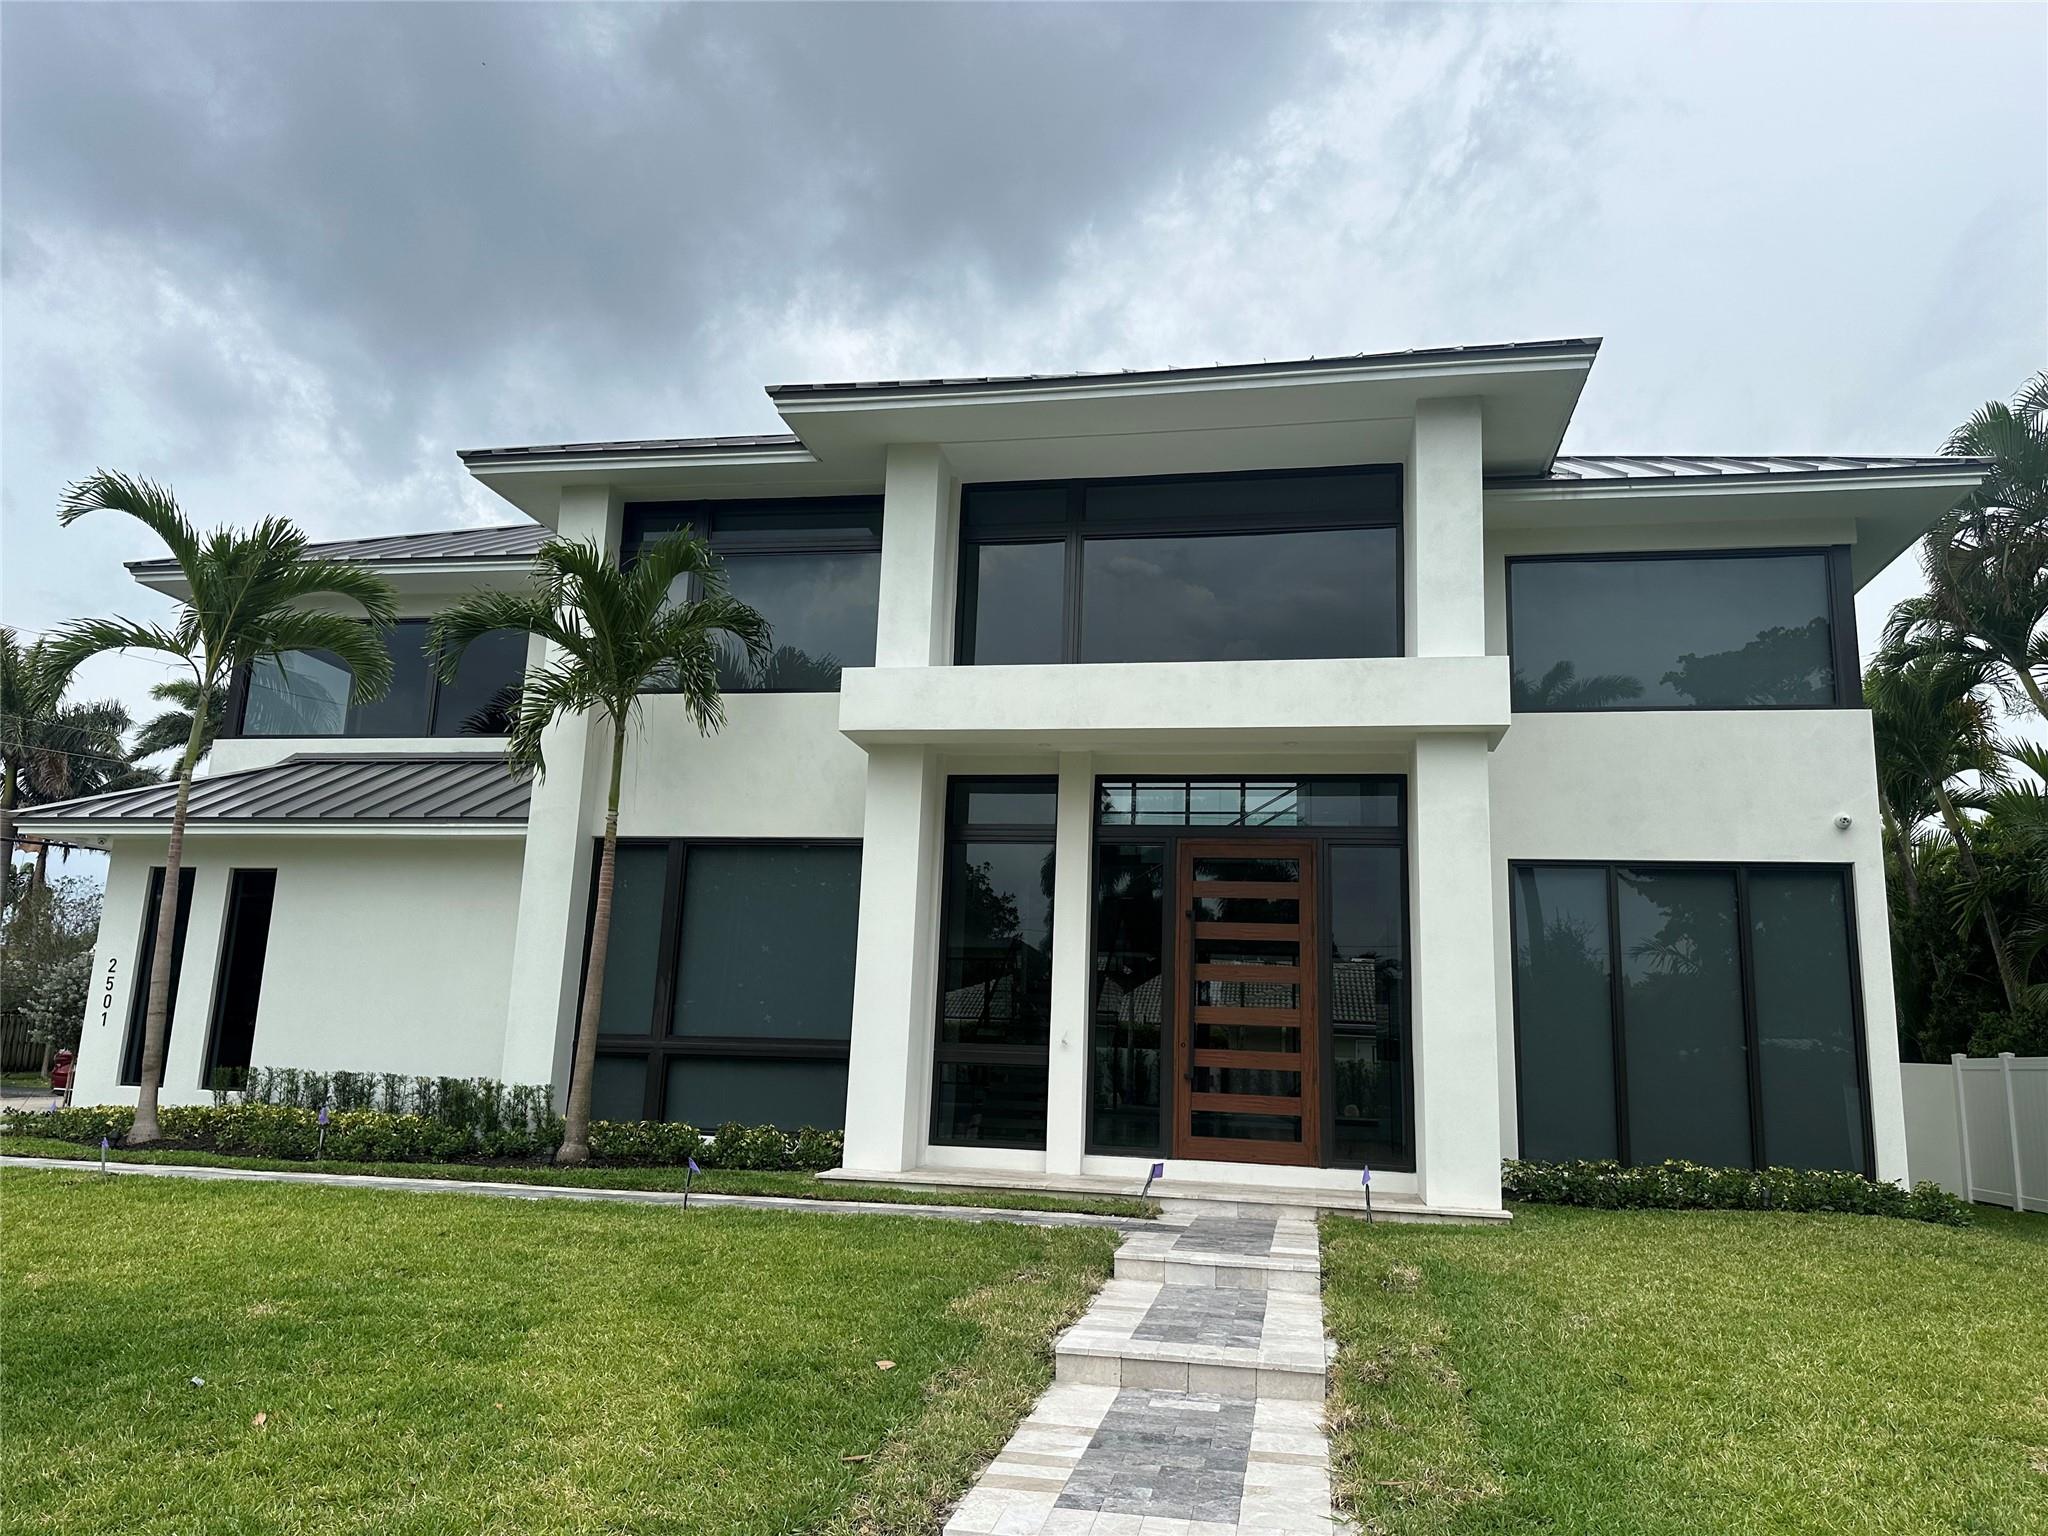 Spectacular new-build by award winning builder/designer Glenn Wright on a beautiful corner lot in Coral Ridge. Masterfully created to raise the bar in contemp architecture w/ floor to ceiling windows for full length views of the lush landscaped tropical & spacious backyard. Sophisticated open floor plan w/ 5 bedrms, 5 baths, plus a powder room. A masterpiece transitional smart home featuring a crackling fireplace for intimate gatherings in the 21' tall great room, Chef’s Italian kitchen offer Sub-Zero & Wolf Appliances. Outdoor kitchen compliments the best of poolside living/dining. Spa-like ambiance w/luxurious bathroom accoutrements in primary suite plus walk-in closets. 3-car side loading garage creates a spectacular front elevation. Coffee bar, cabana bath, expansive lanai, and MORE!